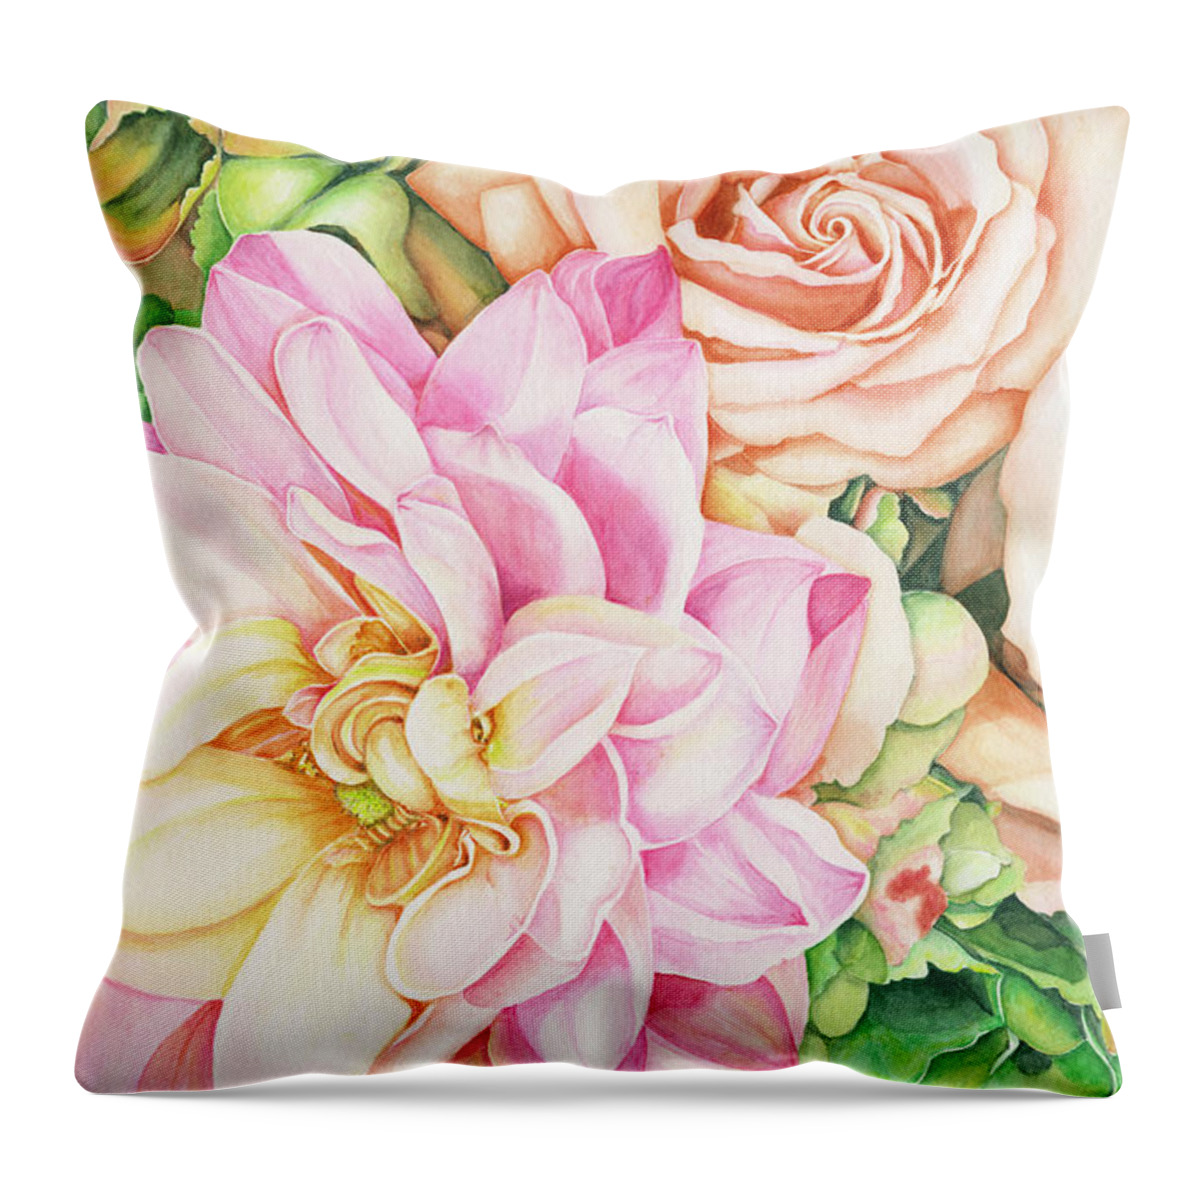 Rose Throw Pillow featuring the painting Chelsea's Bouquet by Lori Taylor